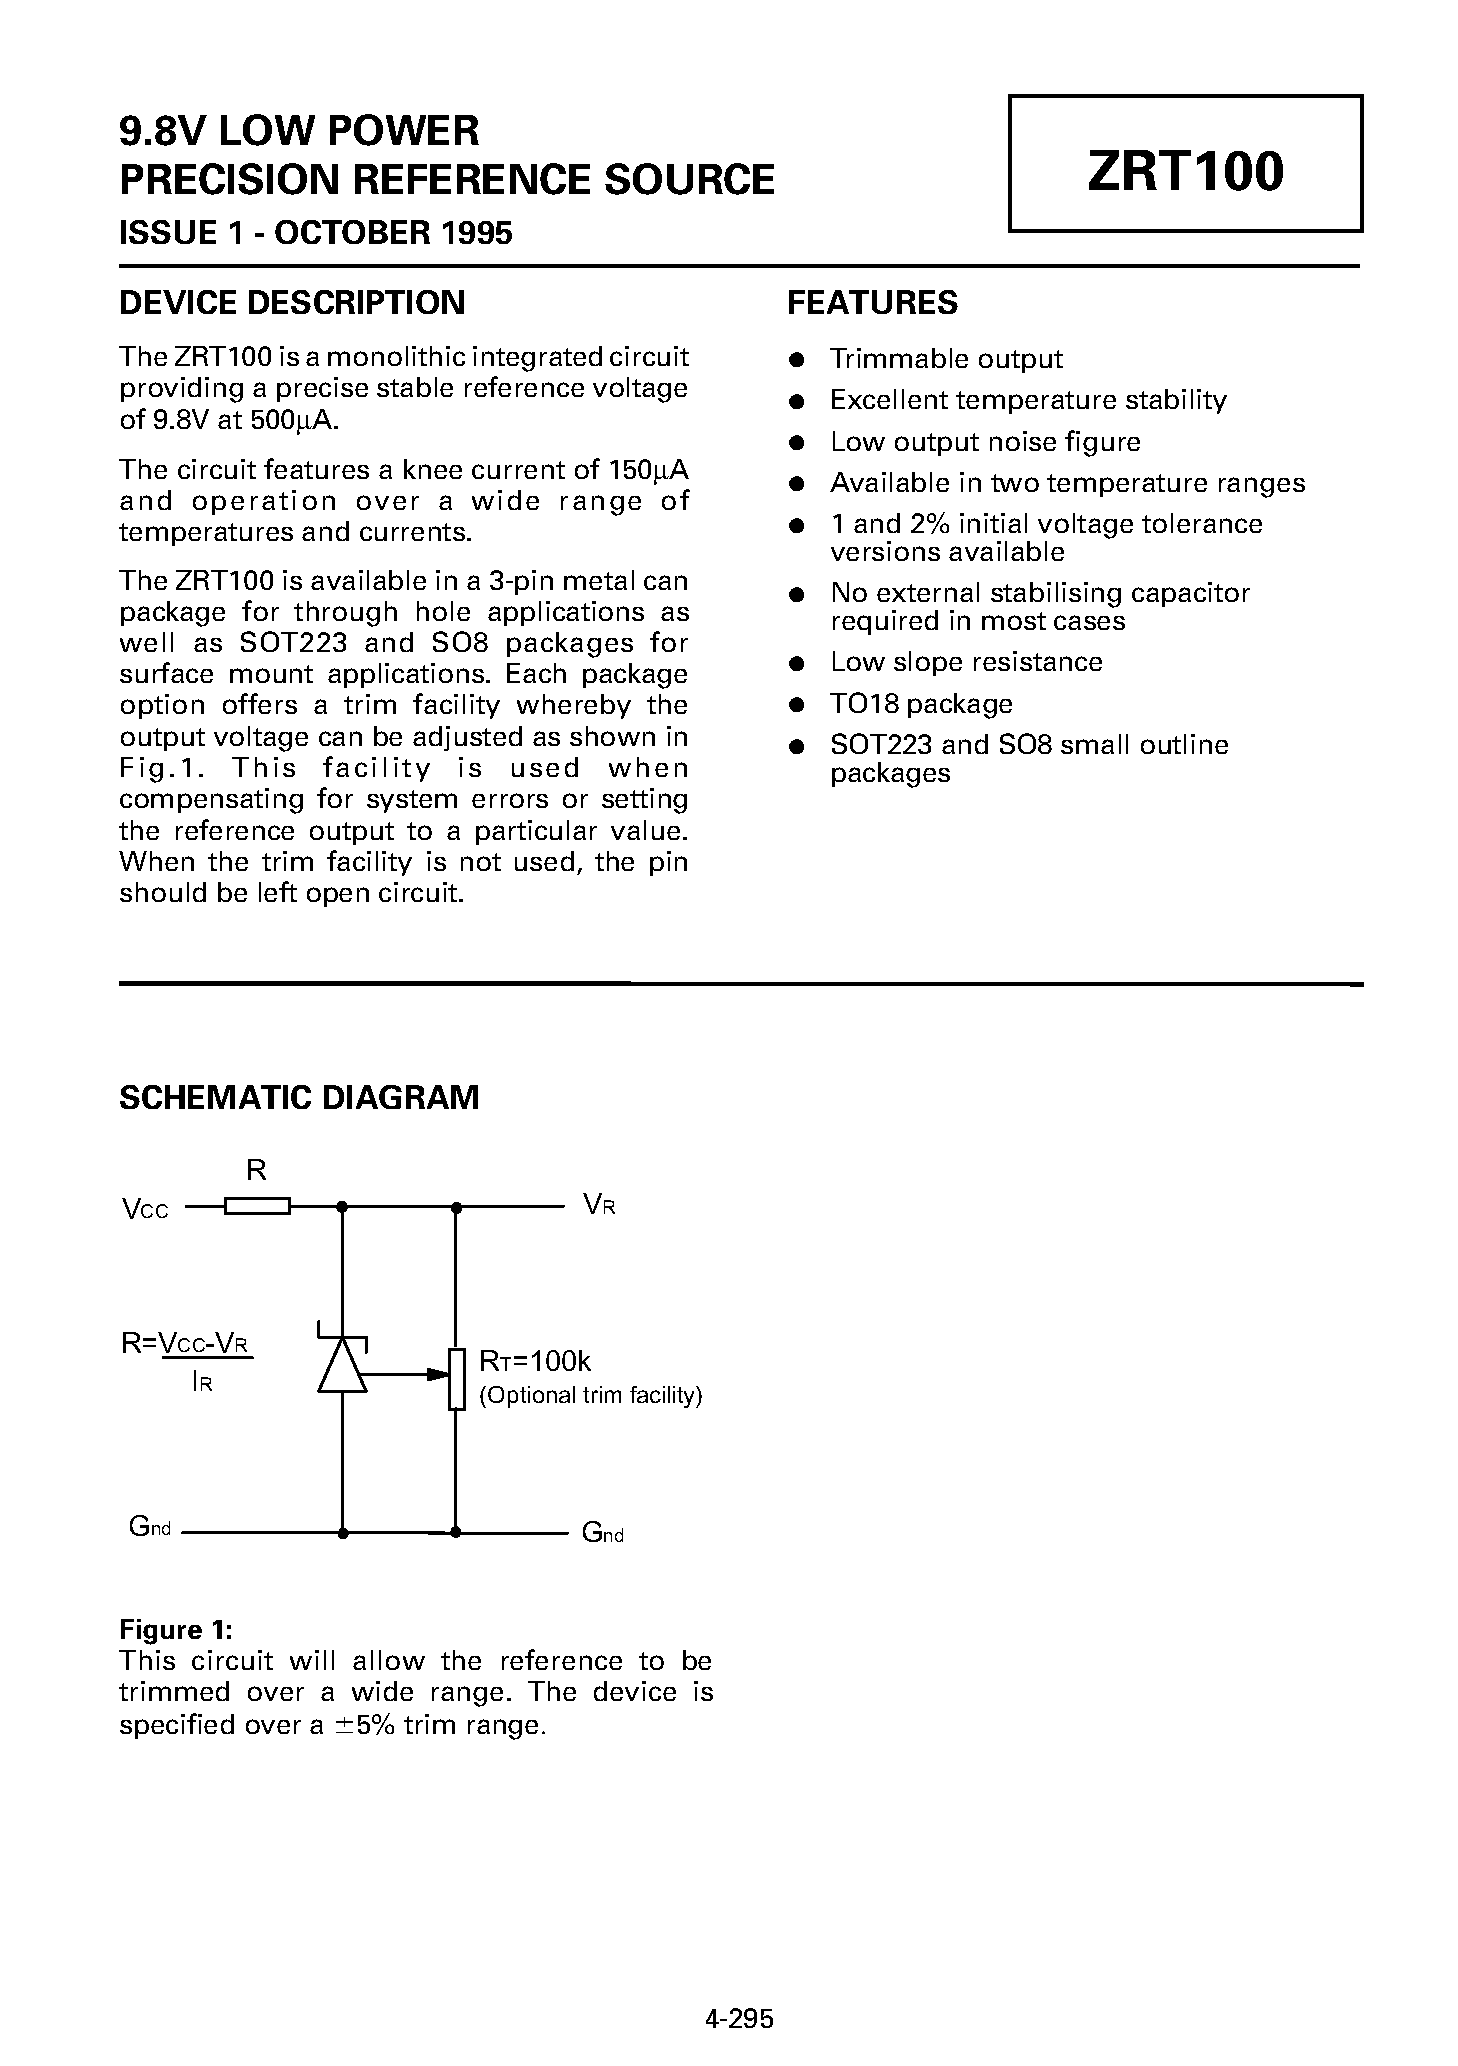 Datasheet ZRT100N8A1 - 9.8V LOW POWER PRECISION REFERENCE SOURCE page 1